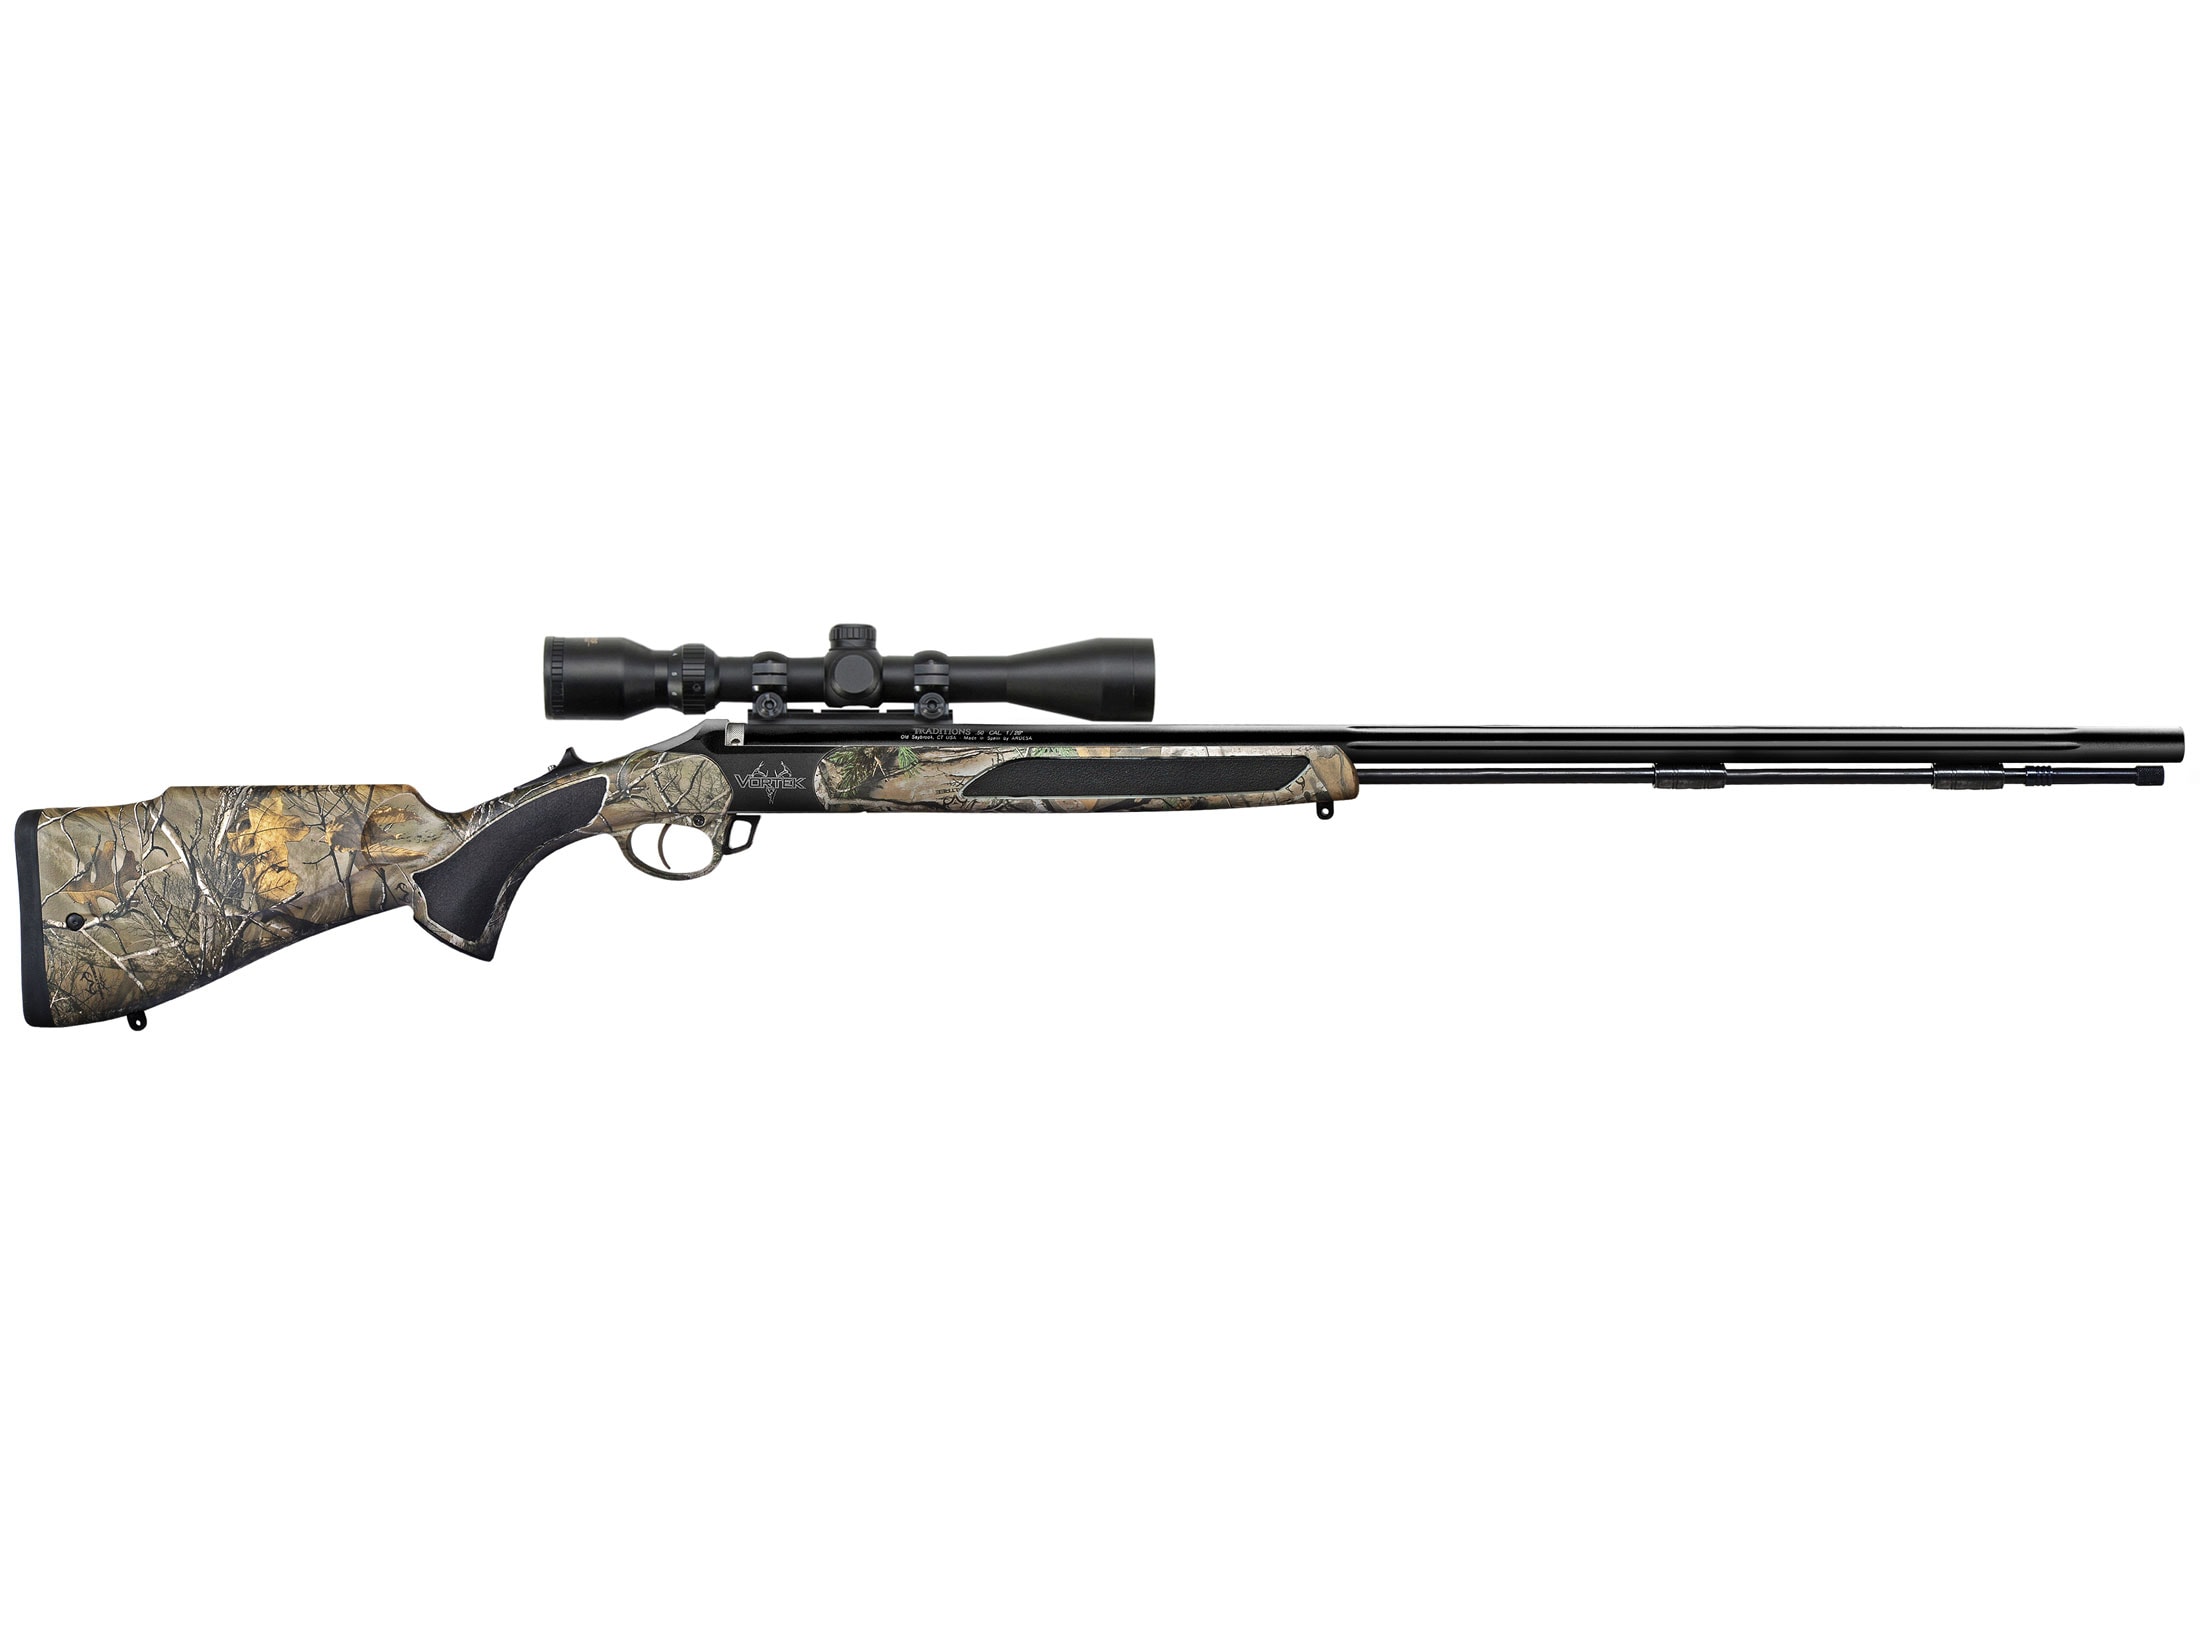 Image of Traditions Vortek StrikerFire LDR Muzzleloading Rifle with 3-9x40mm Scope 50 Caliber 30" Fluted Nitride Barrel Synthetic Stock Realtree Xtra